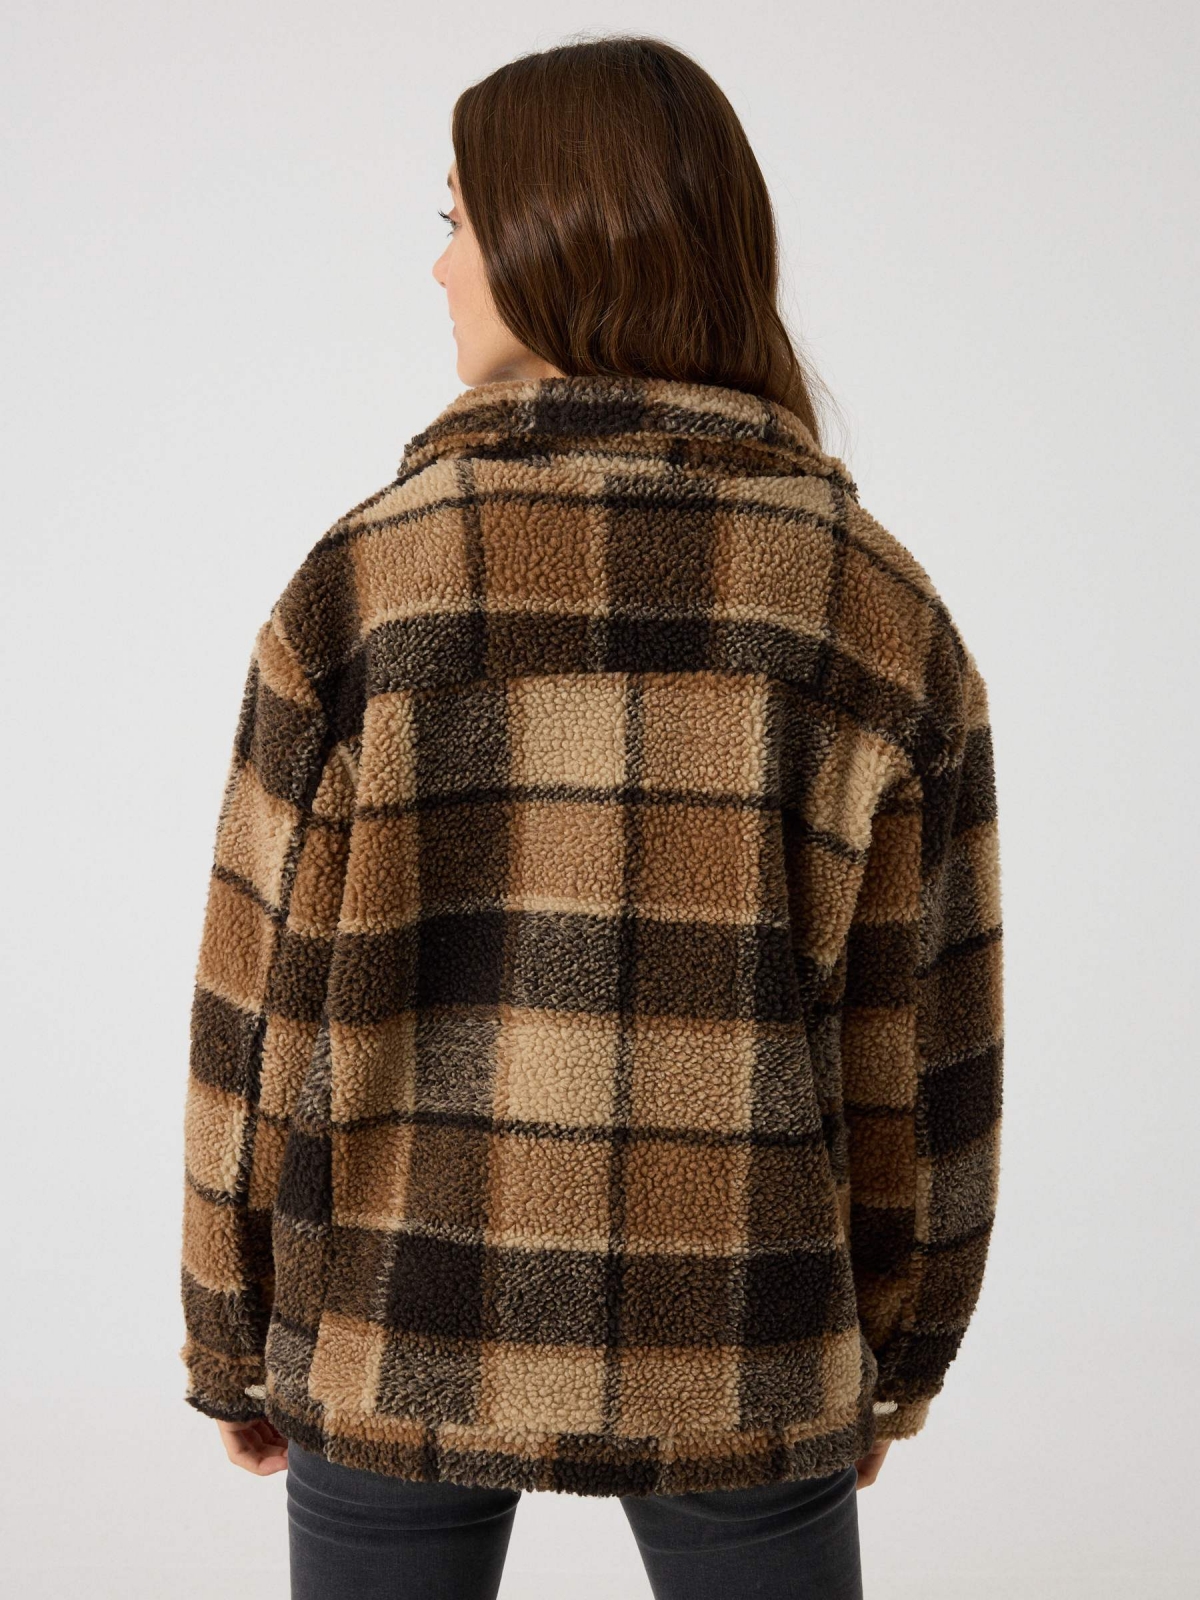 Fleece jacket plaid brown middle back view